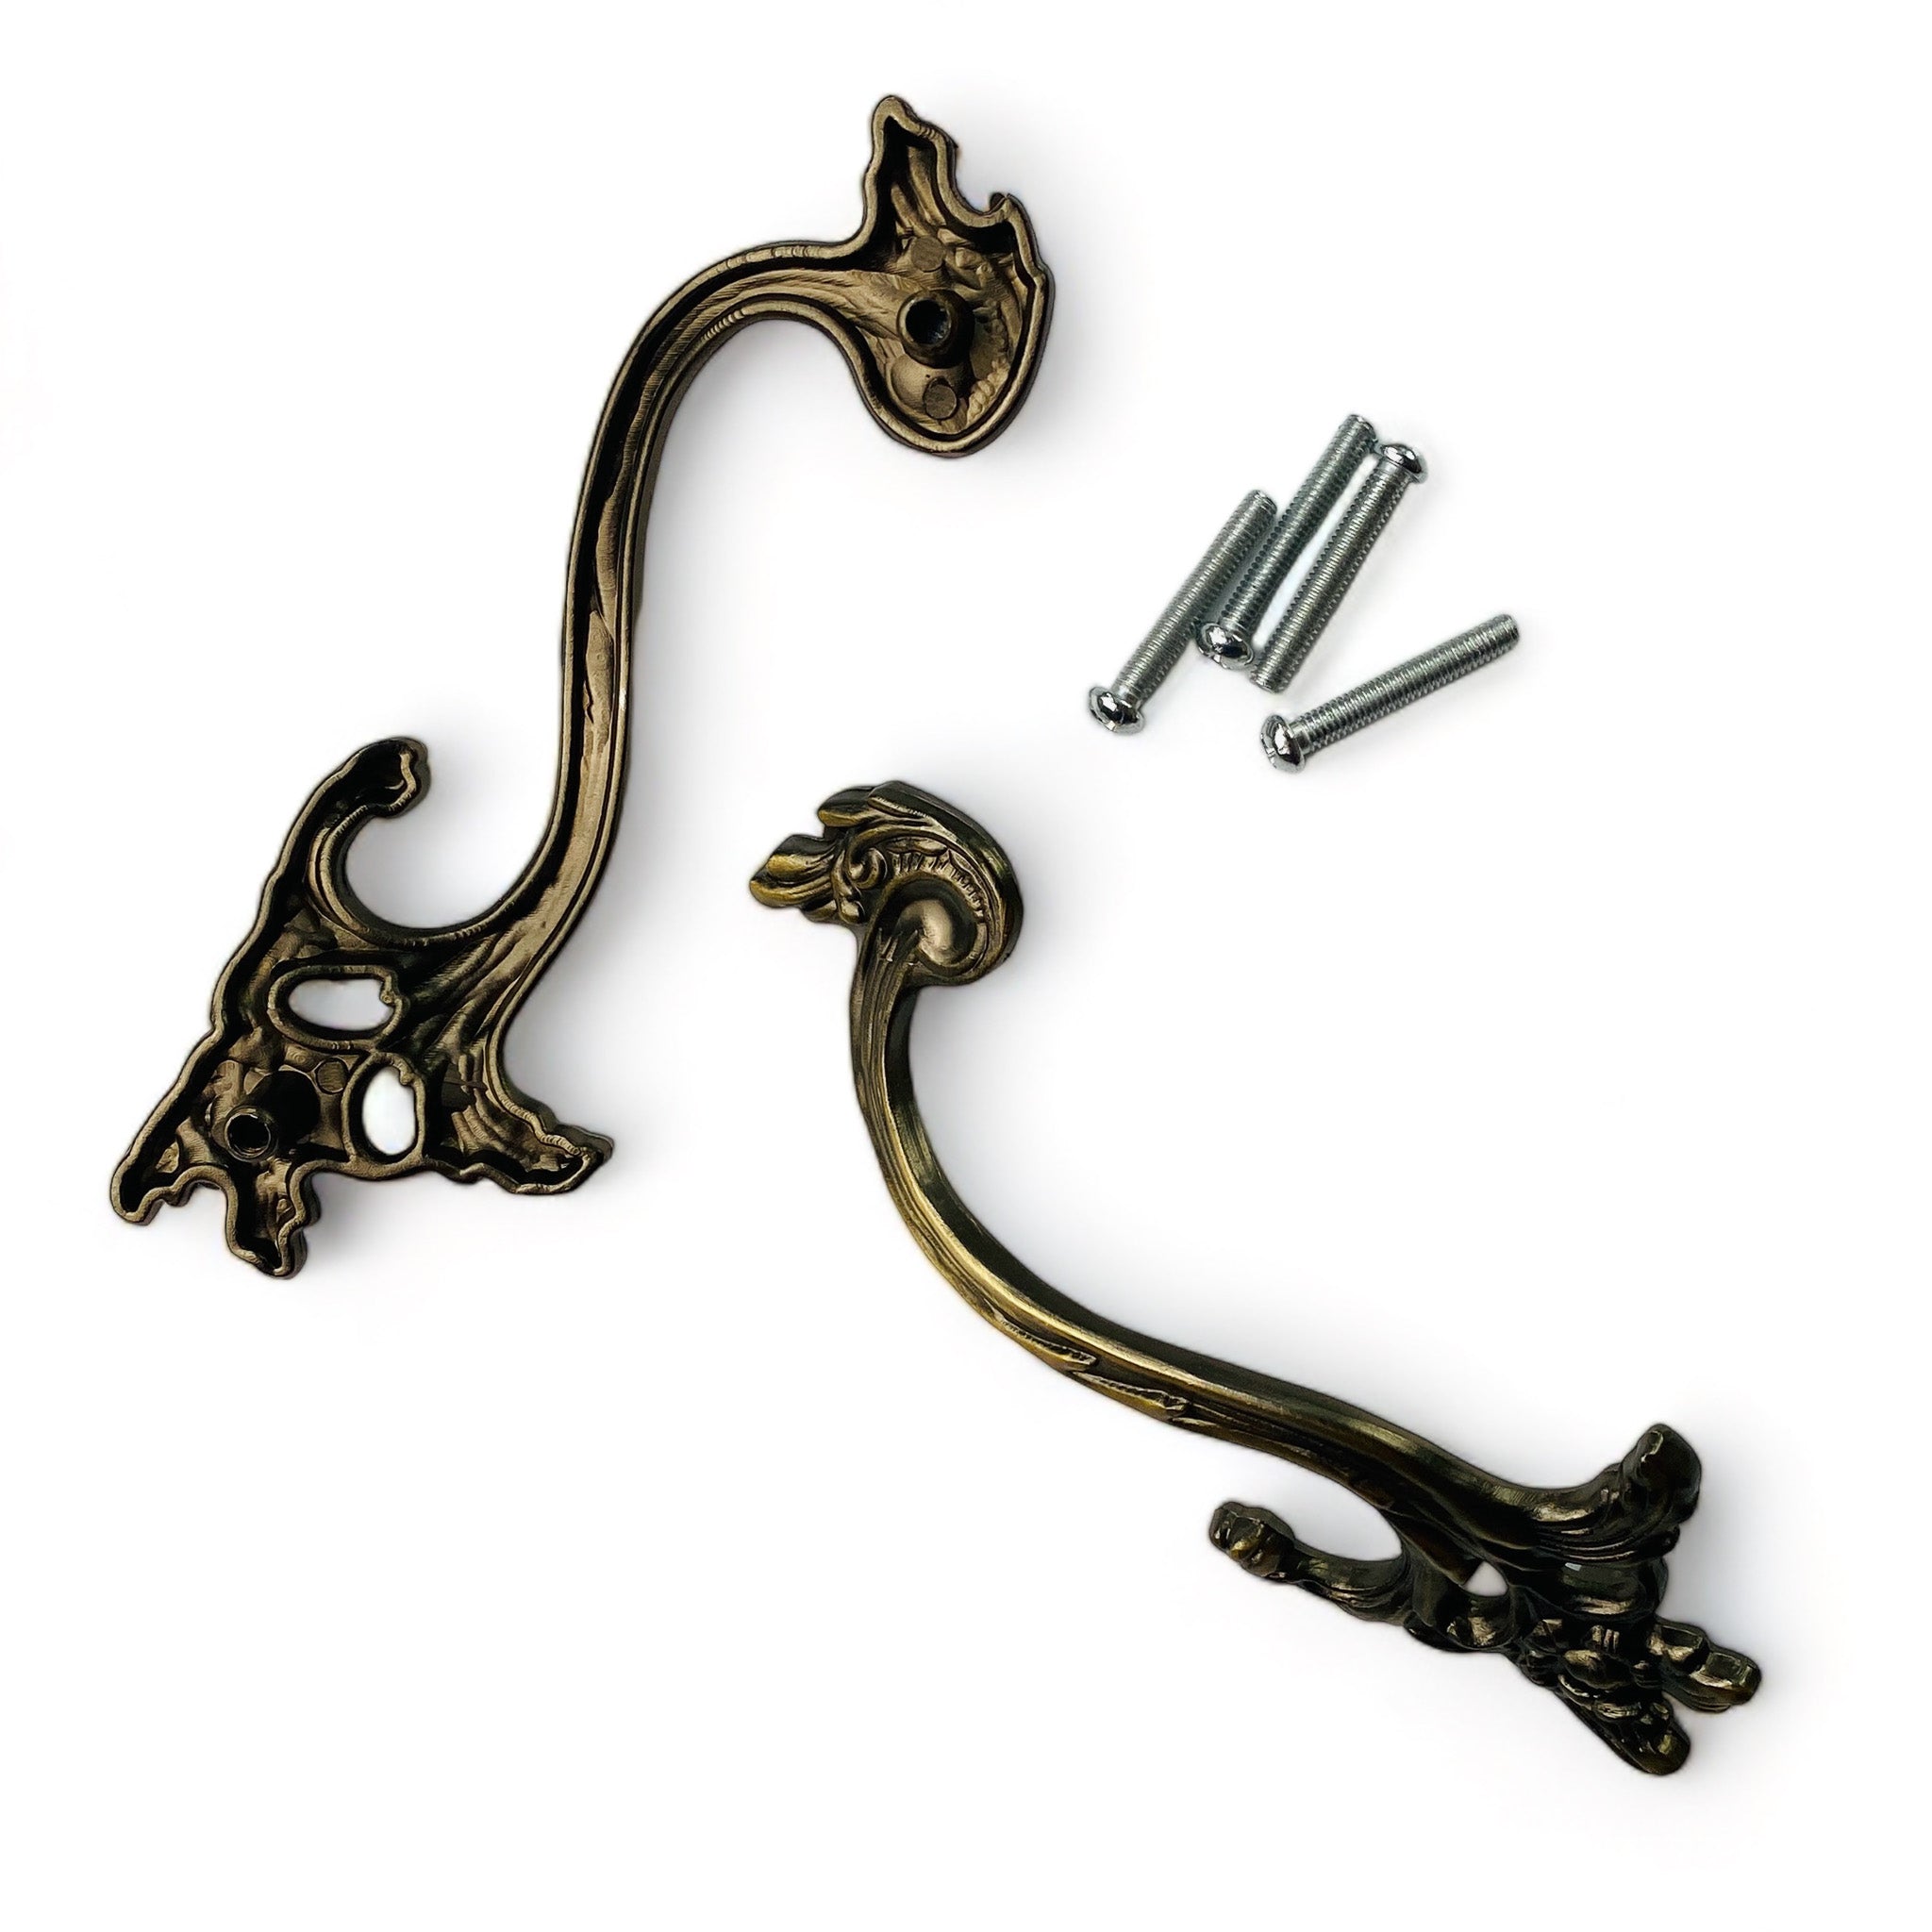 Two metal drawer pulls and 4 screws featuring subtle vines and leaves are against a white background.